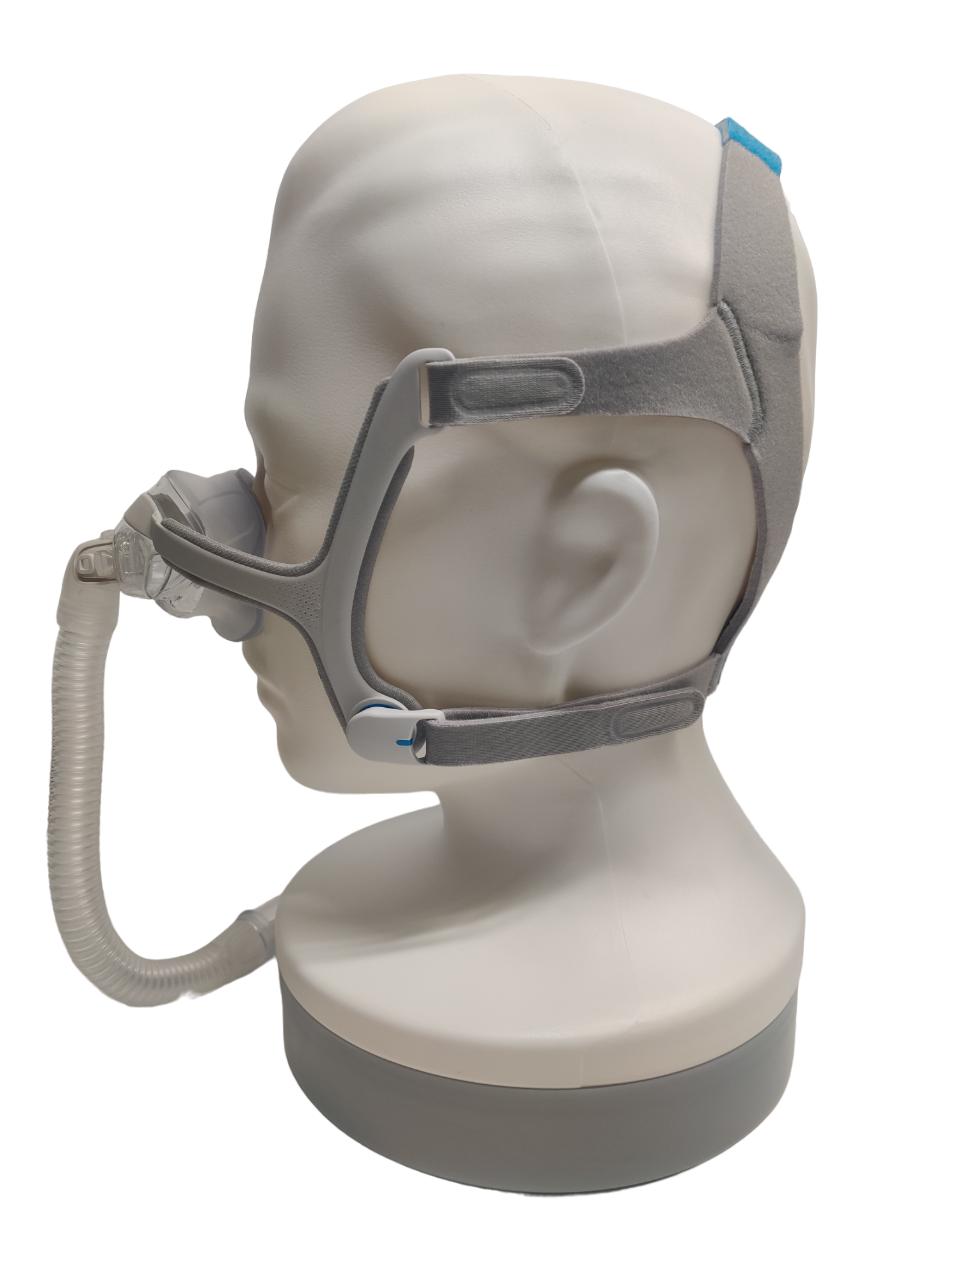 ResMed AirTouch N20 Nasal CPAP Mask with Headgear